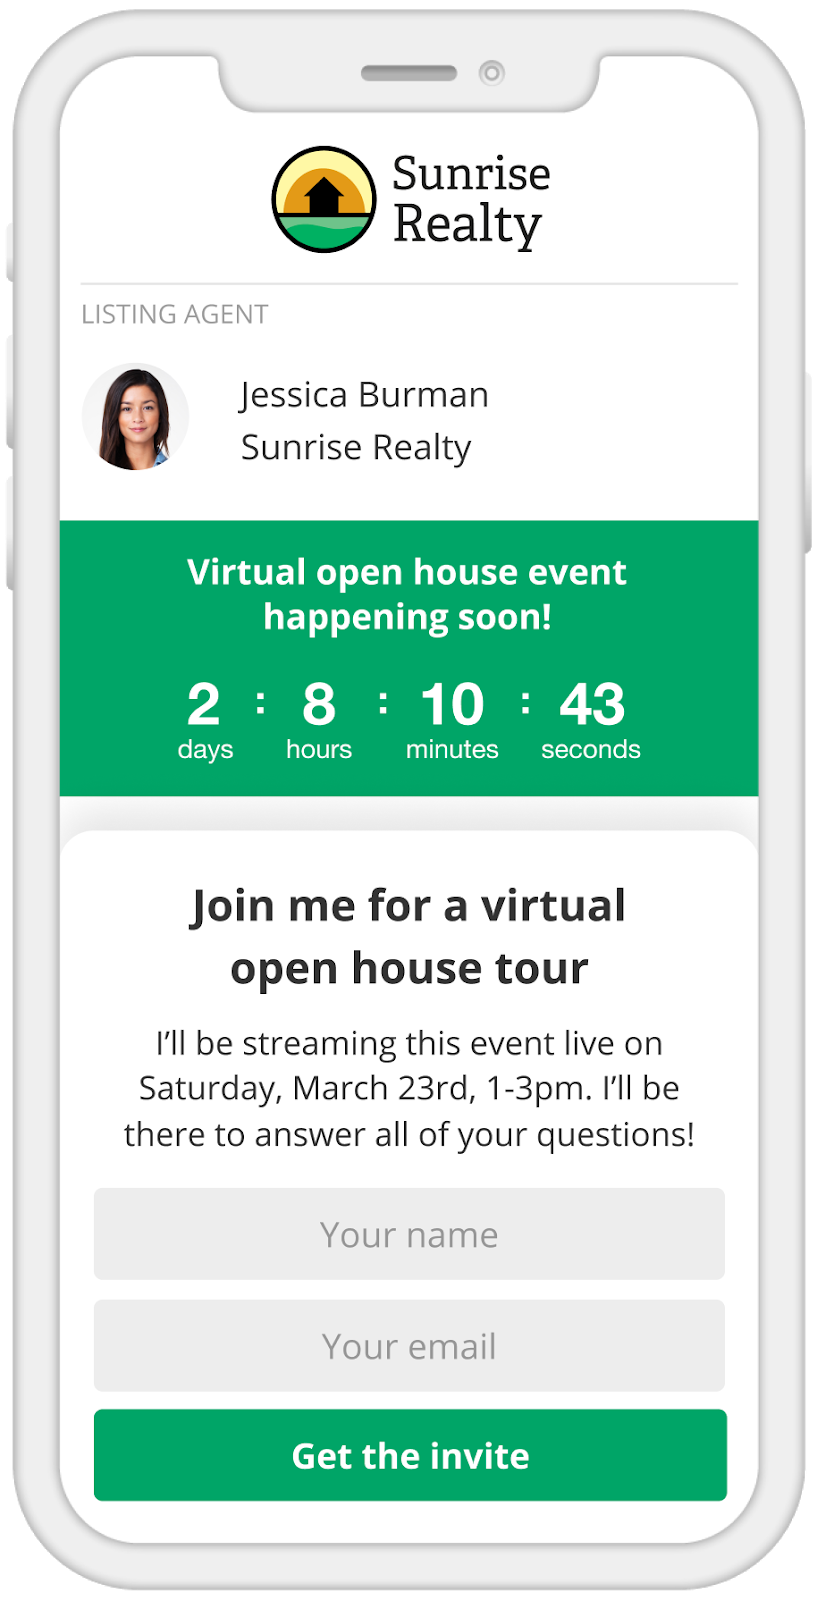 Landing page for virtual open house events